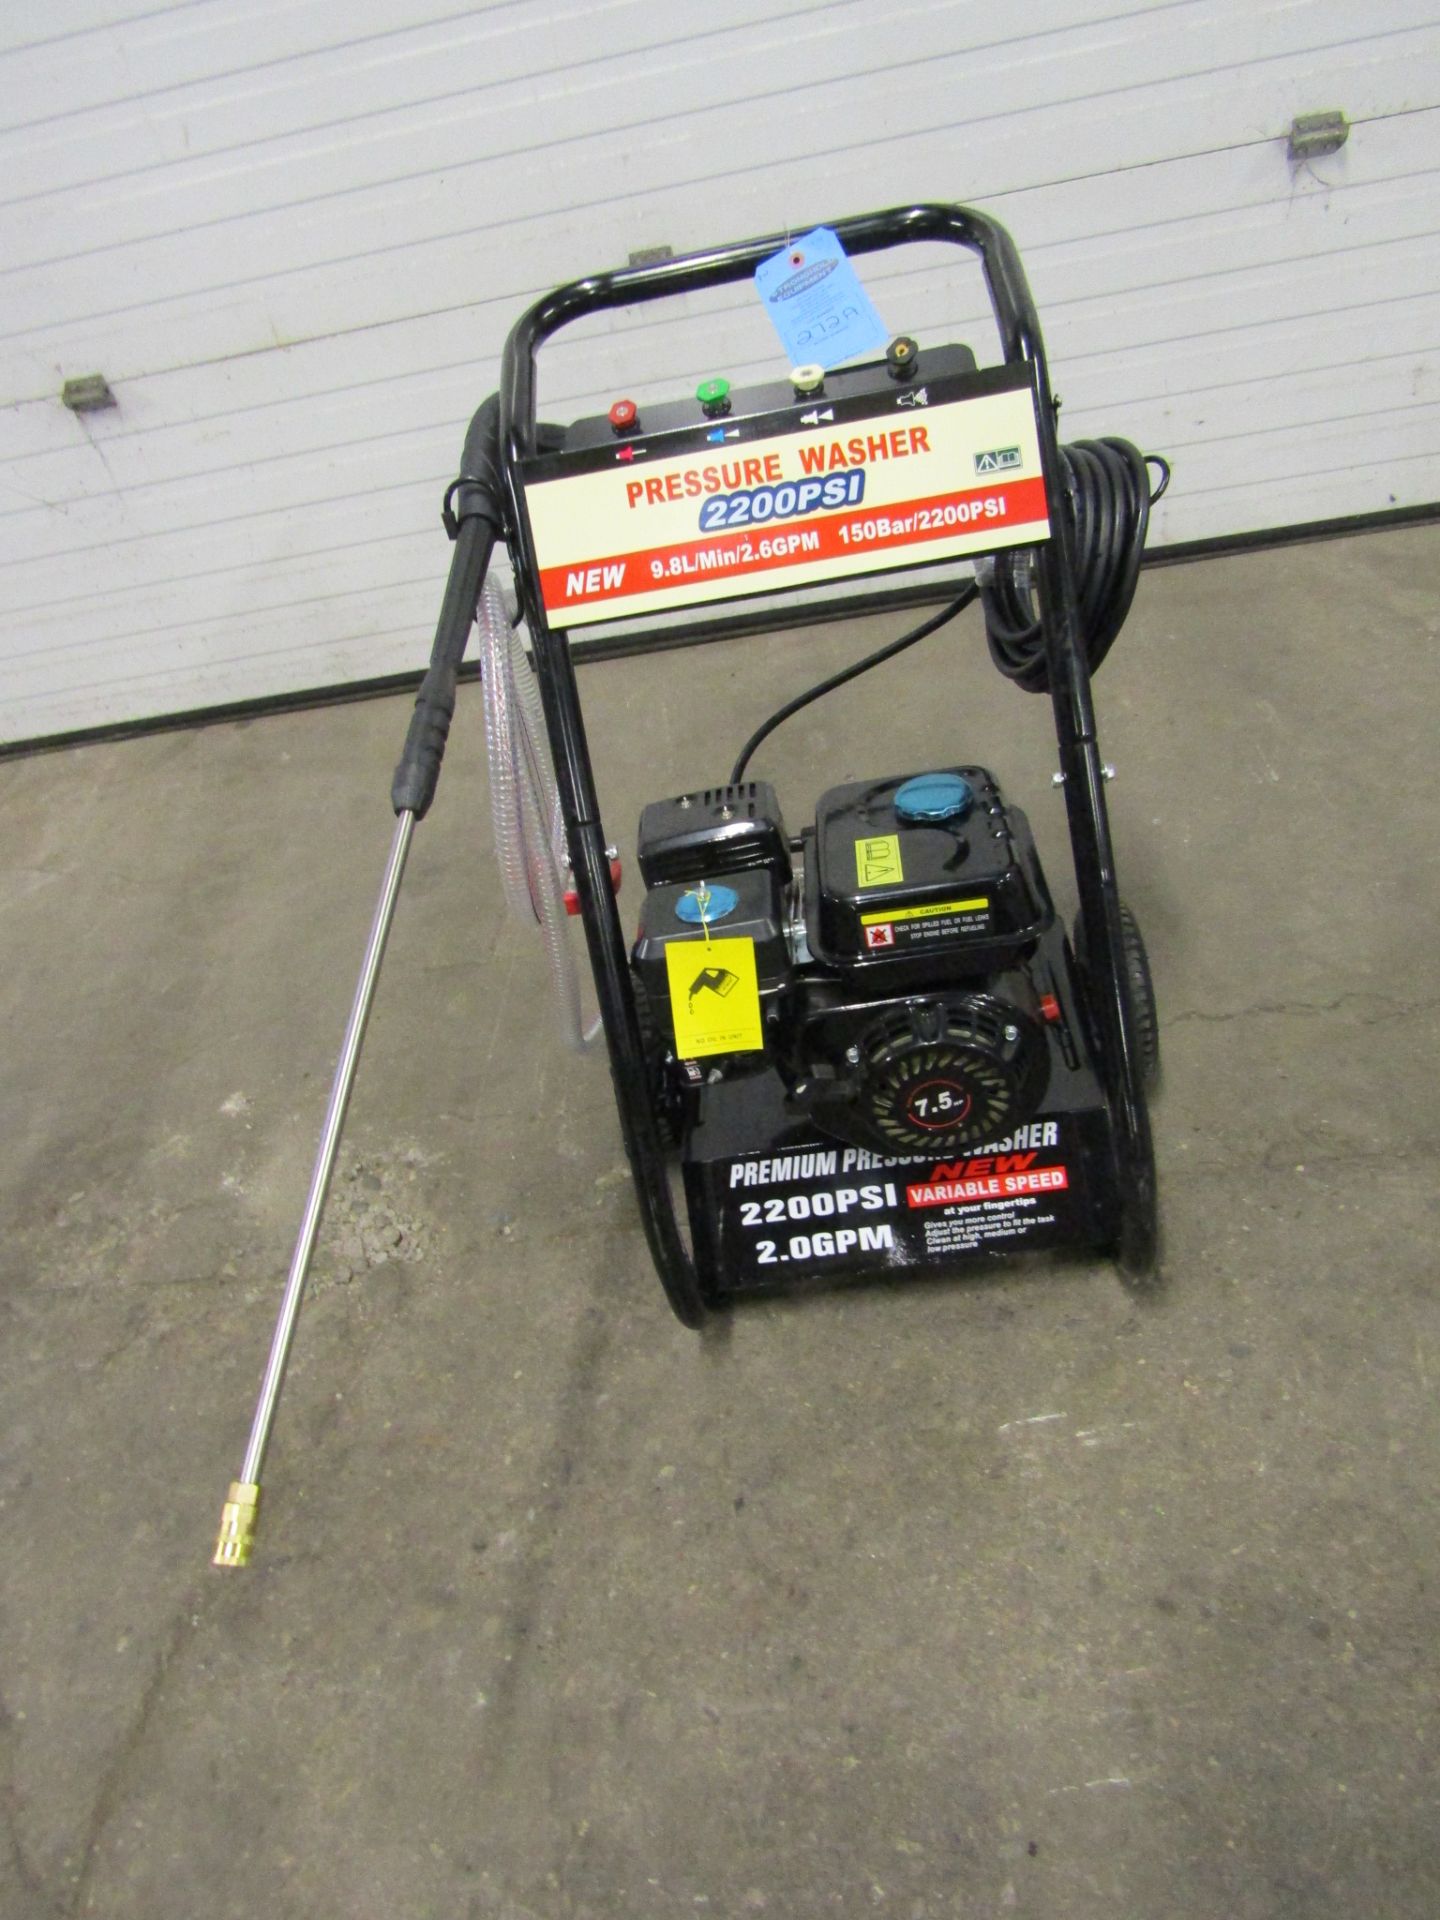 Brand New Pressure Power Washer - Gas Powered Unit 2200PSI - Variable Speed 2.0GPM with various